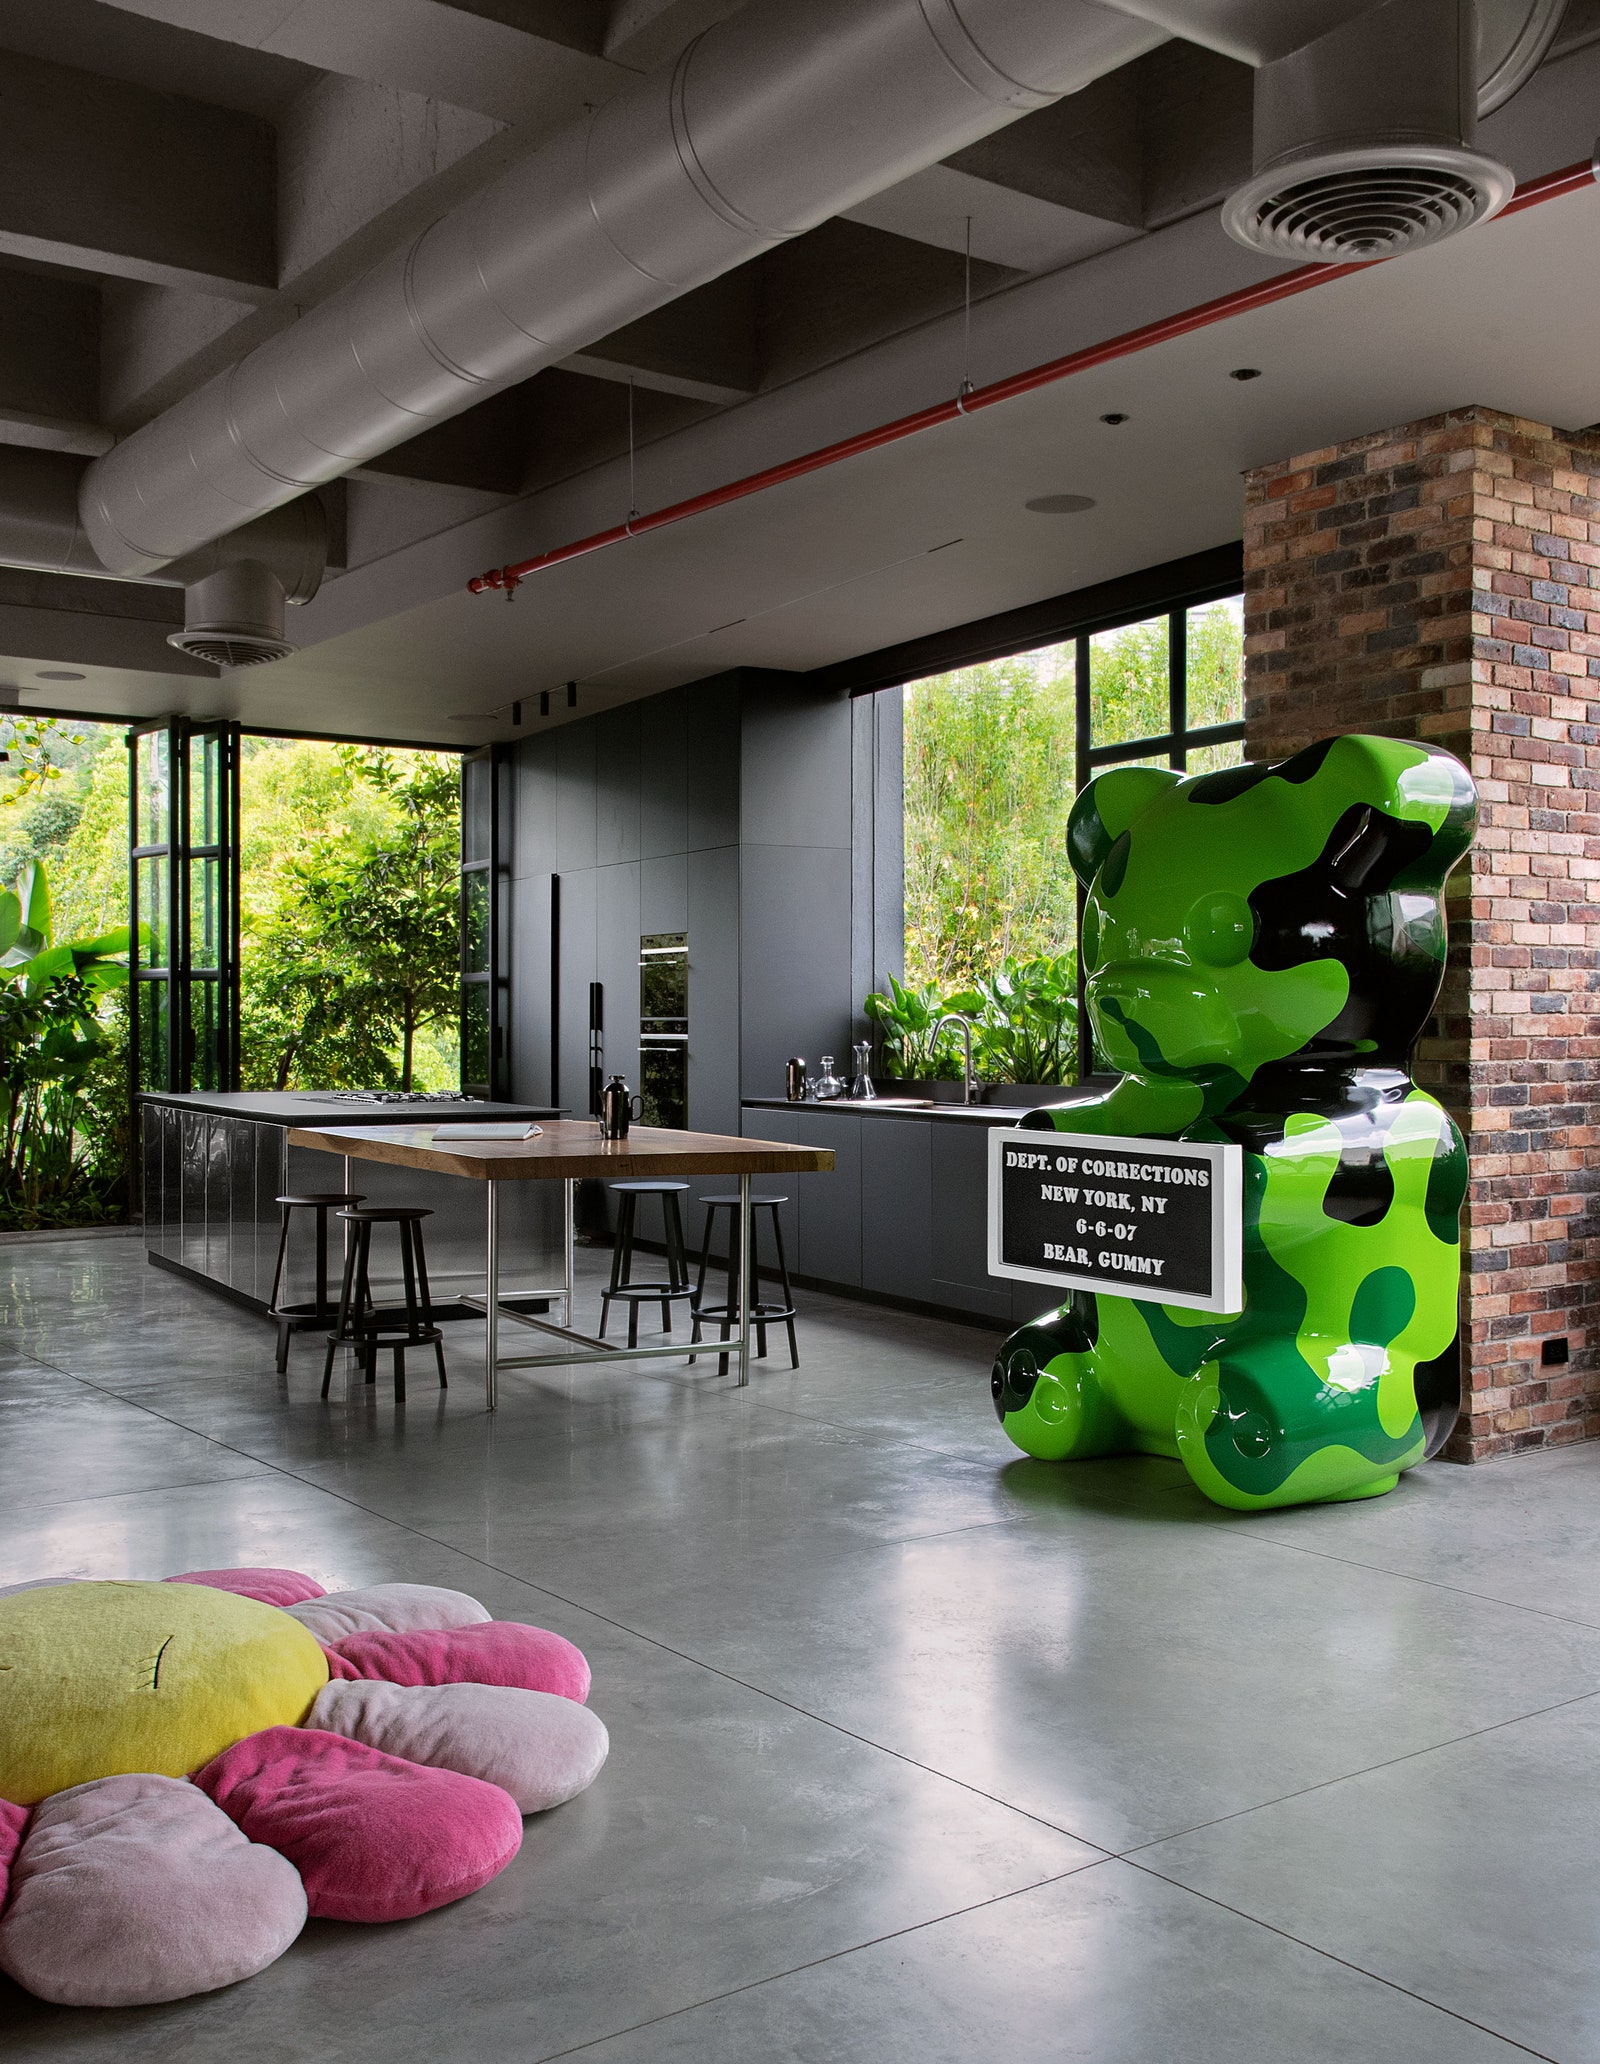 pA Whisbe sculpture and Takashi Murakami floor cushion add jolts of color to the Medelln loft. p 